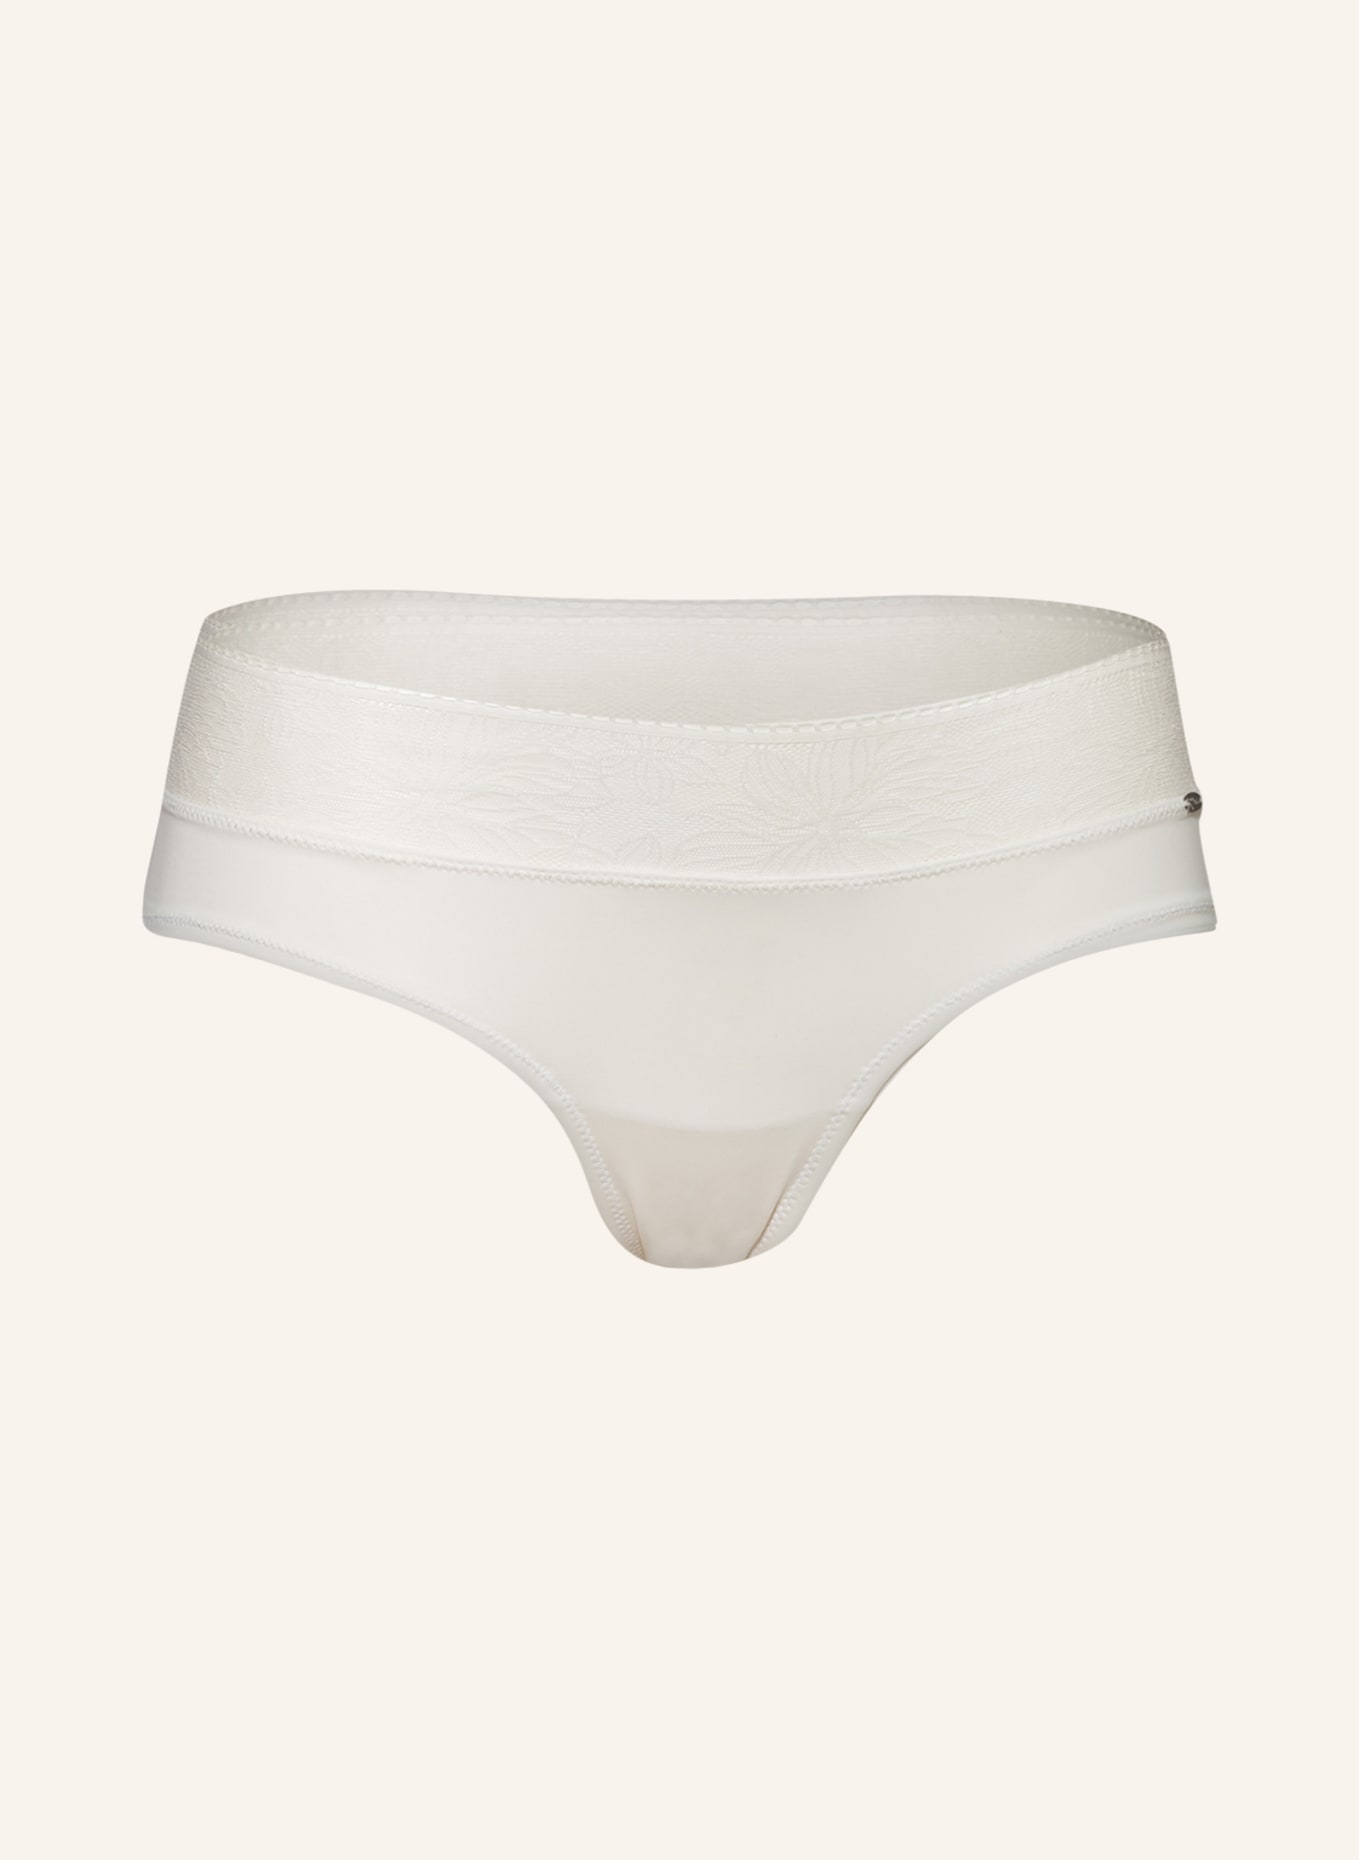 Skiny Panty EVERY DAY IN MICRO LACE in cream